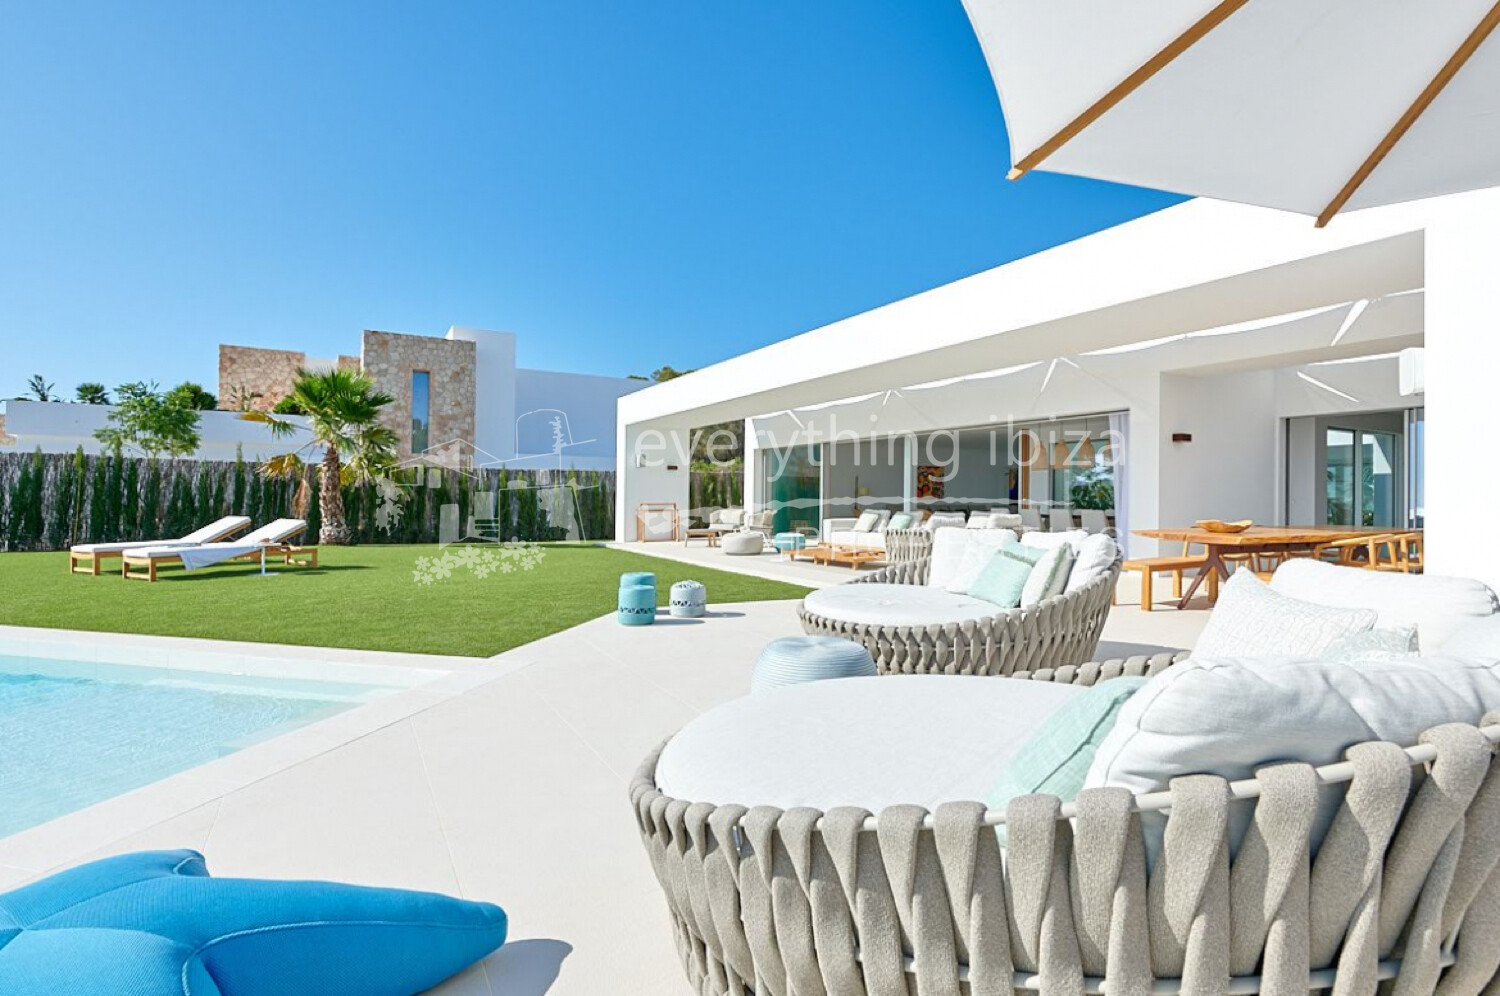 Brand New Luxury Villa Close to the Beach with Fantastic Views, ref. 1541, for sale in Ibiza by everything ibiza Properties